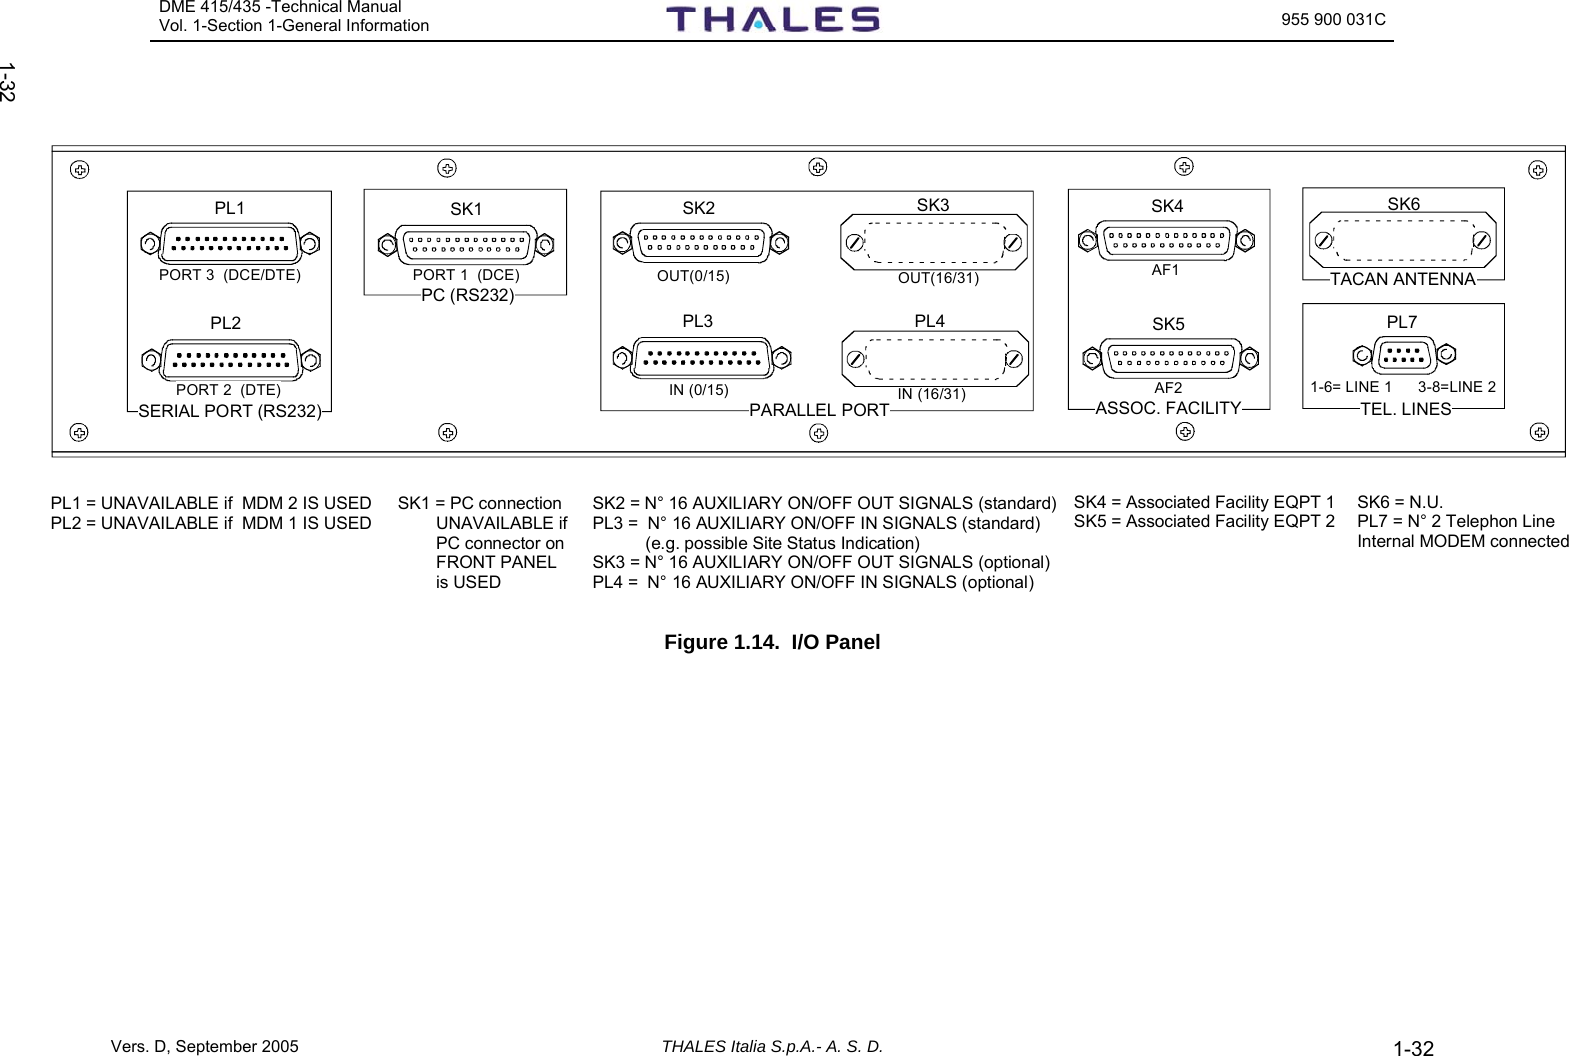 DME 415/435 -Technical Manual Vol. 1-Section 1-General Information   955 900 031C Vers. D, September 2005 THALES Italia S.p.A.- A. S. D. 1-32   1-32   SK6TACAN ANTENNAPL7TEL. LINES1-6= LINE 1      3-8=LINE 2ASSOC. FACILITYAF1AF2SK4SK5PARALLEL PORTIN (16/31)PL4SK3OUT(16/31)SK2PL3IN (0/15)OUT(0/15)PC (RS232)SK1PORT 1  (DCE)PORT 3  (DCE/DTE)PL2PL1PORT 2  (DTE)SERIAL PORT (RS232)PL1 = UNAVAILABLE if  MDM 2 IS USEDPL2 = UNAVAILABLE if  MDM 1 IS USEDSK1 = PC connection        UNAVAILABLE if        PC connector on        FRONT PANEL         is USEDSK2 = N° 16 AUXILIARY ON/OFF OUT SIGNALS (standard)PL3 =  N° 16 AUXILIARY ON/OFF IN SIGNALS (standard)            (e.g. possible Site Status Indication)SK3 = N° 16 AUXILIARY ON/OFF OUT SIGNALS (optional)PL4 =  N° 16 AUXILIARY ON/OFF IN SIGNALS (optional)SK4 = Associated Facility EQPT 1SK5 = Associated Facility EQPT 2SK6 = N.U.PL7 = N° 2 Telephon LineInternal MODEM connected  Figure 1.14.  I/O Panel 